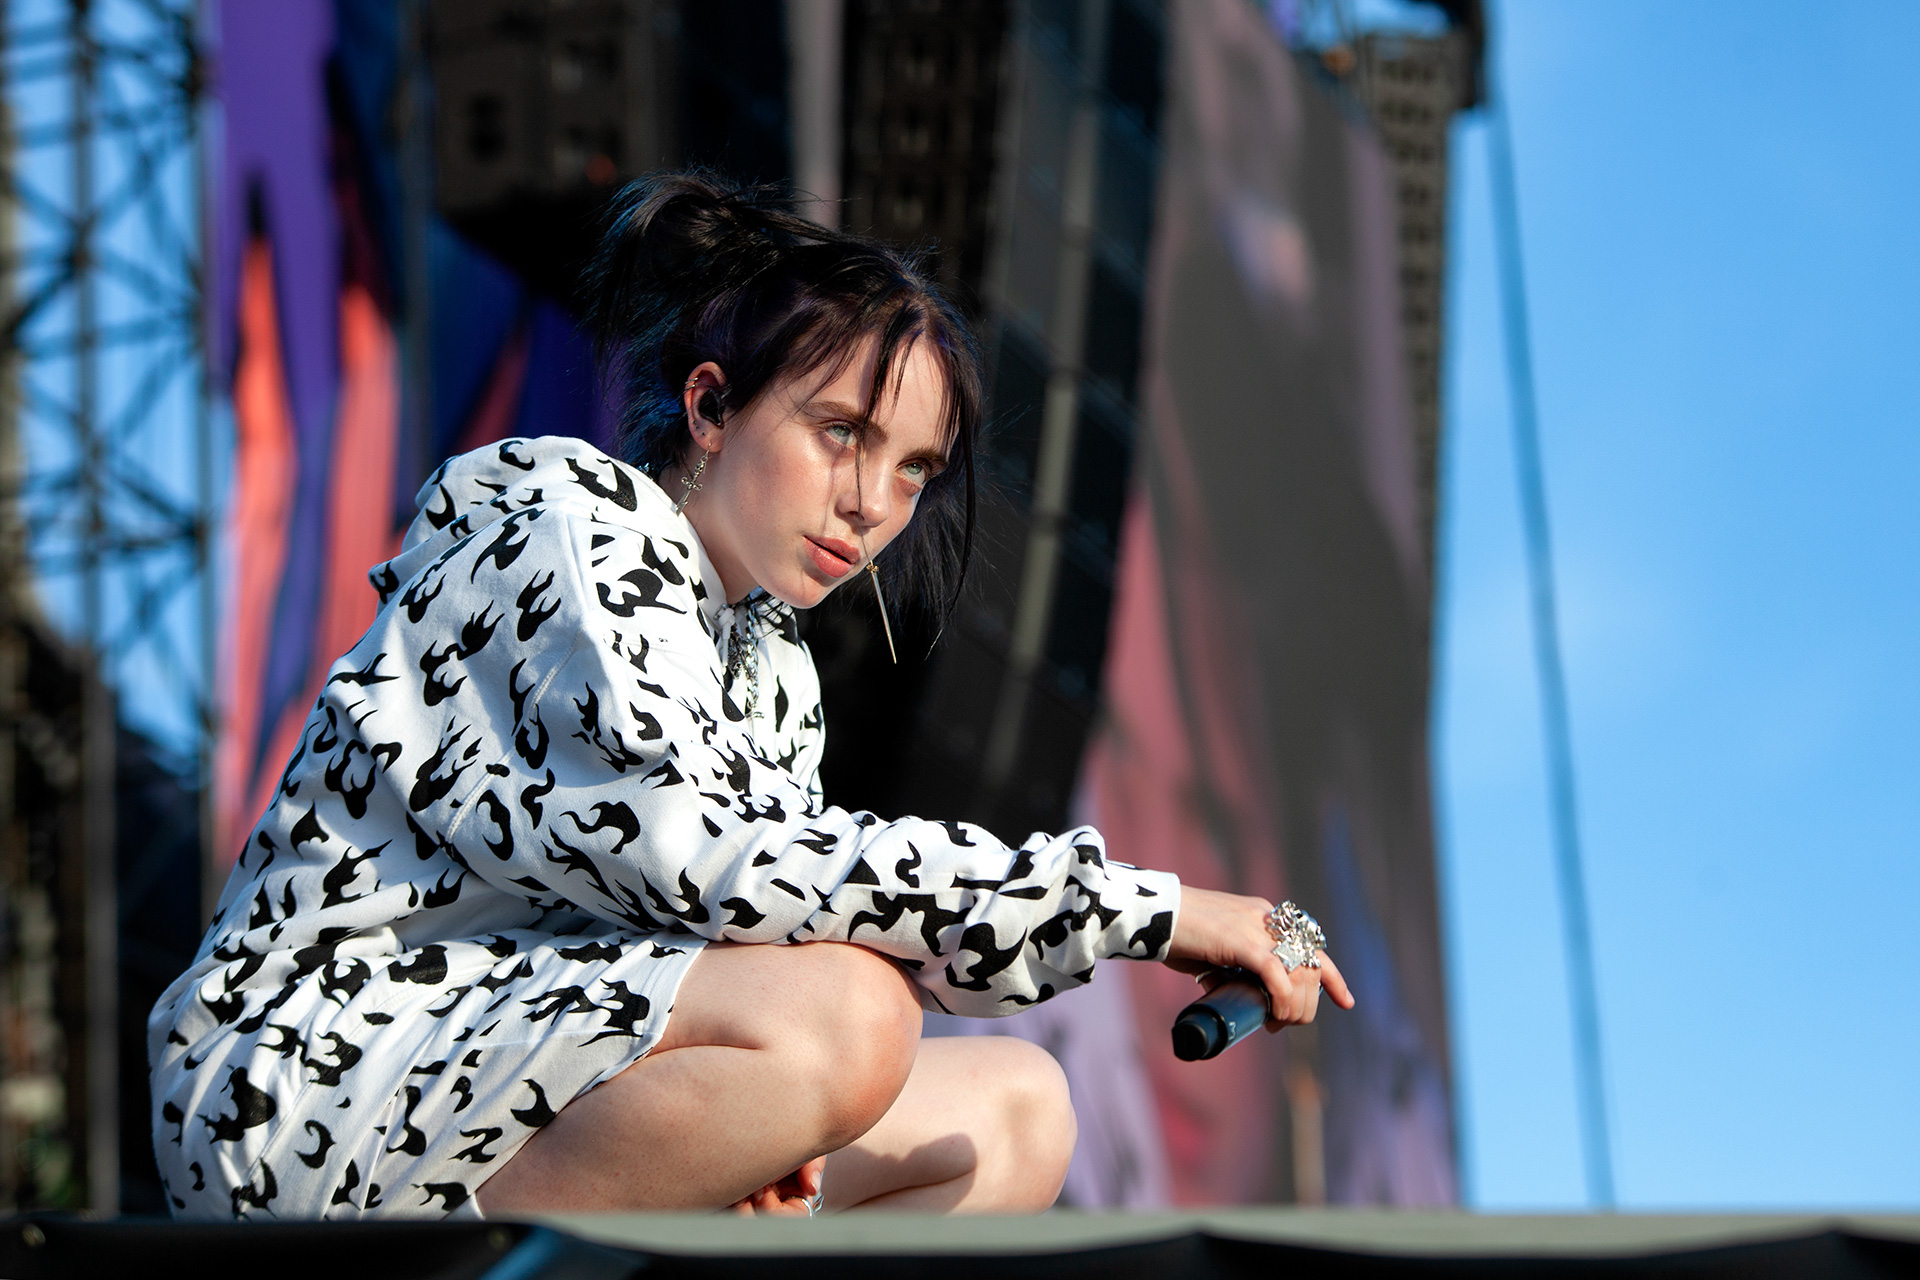 Billie Eilish's blue hair and outfit at the 2019 Lollapalooza Music Festival - wide 6